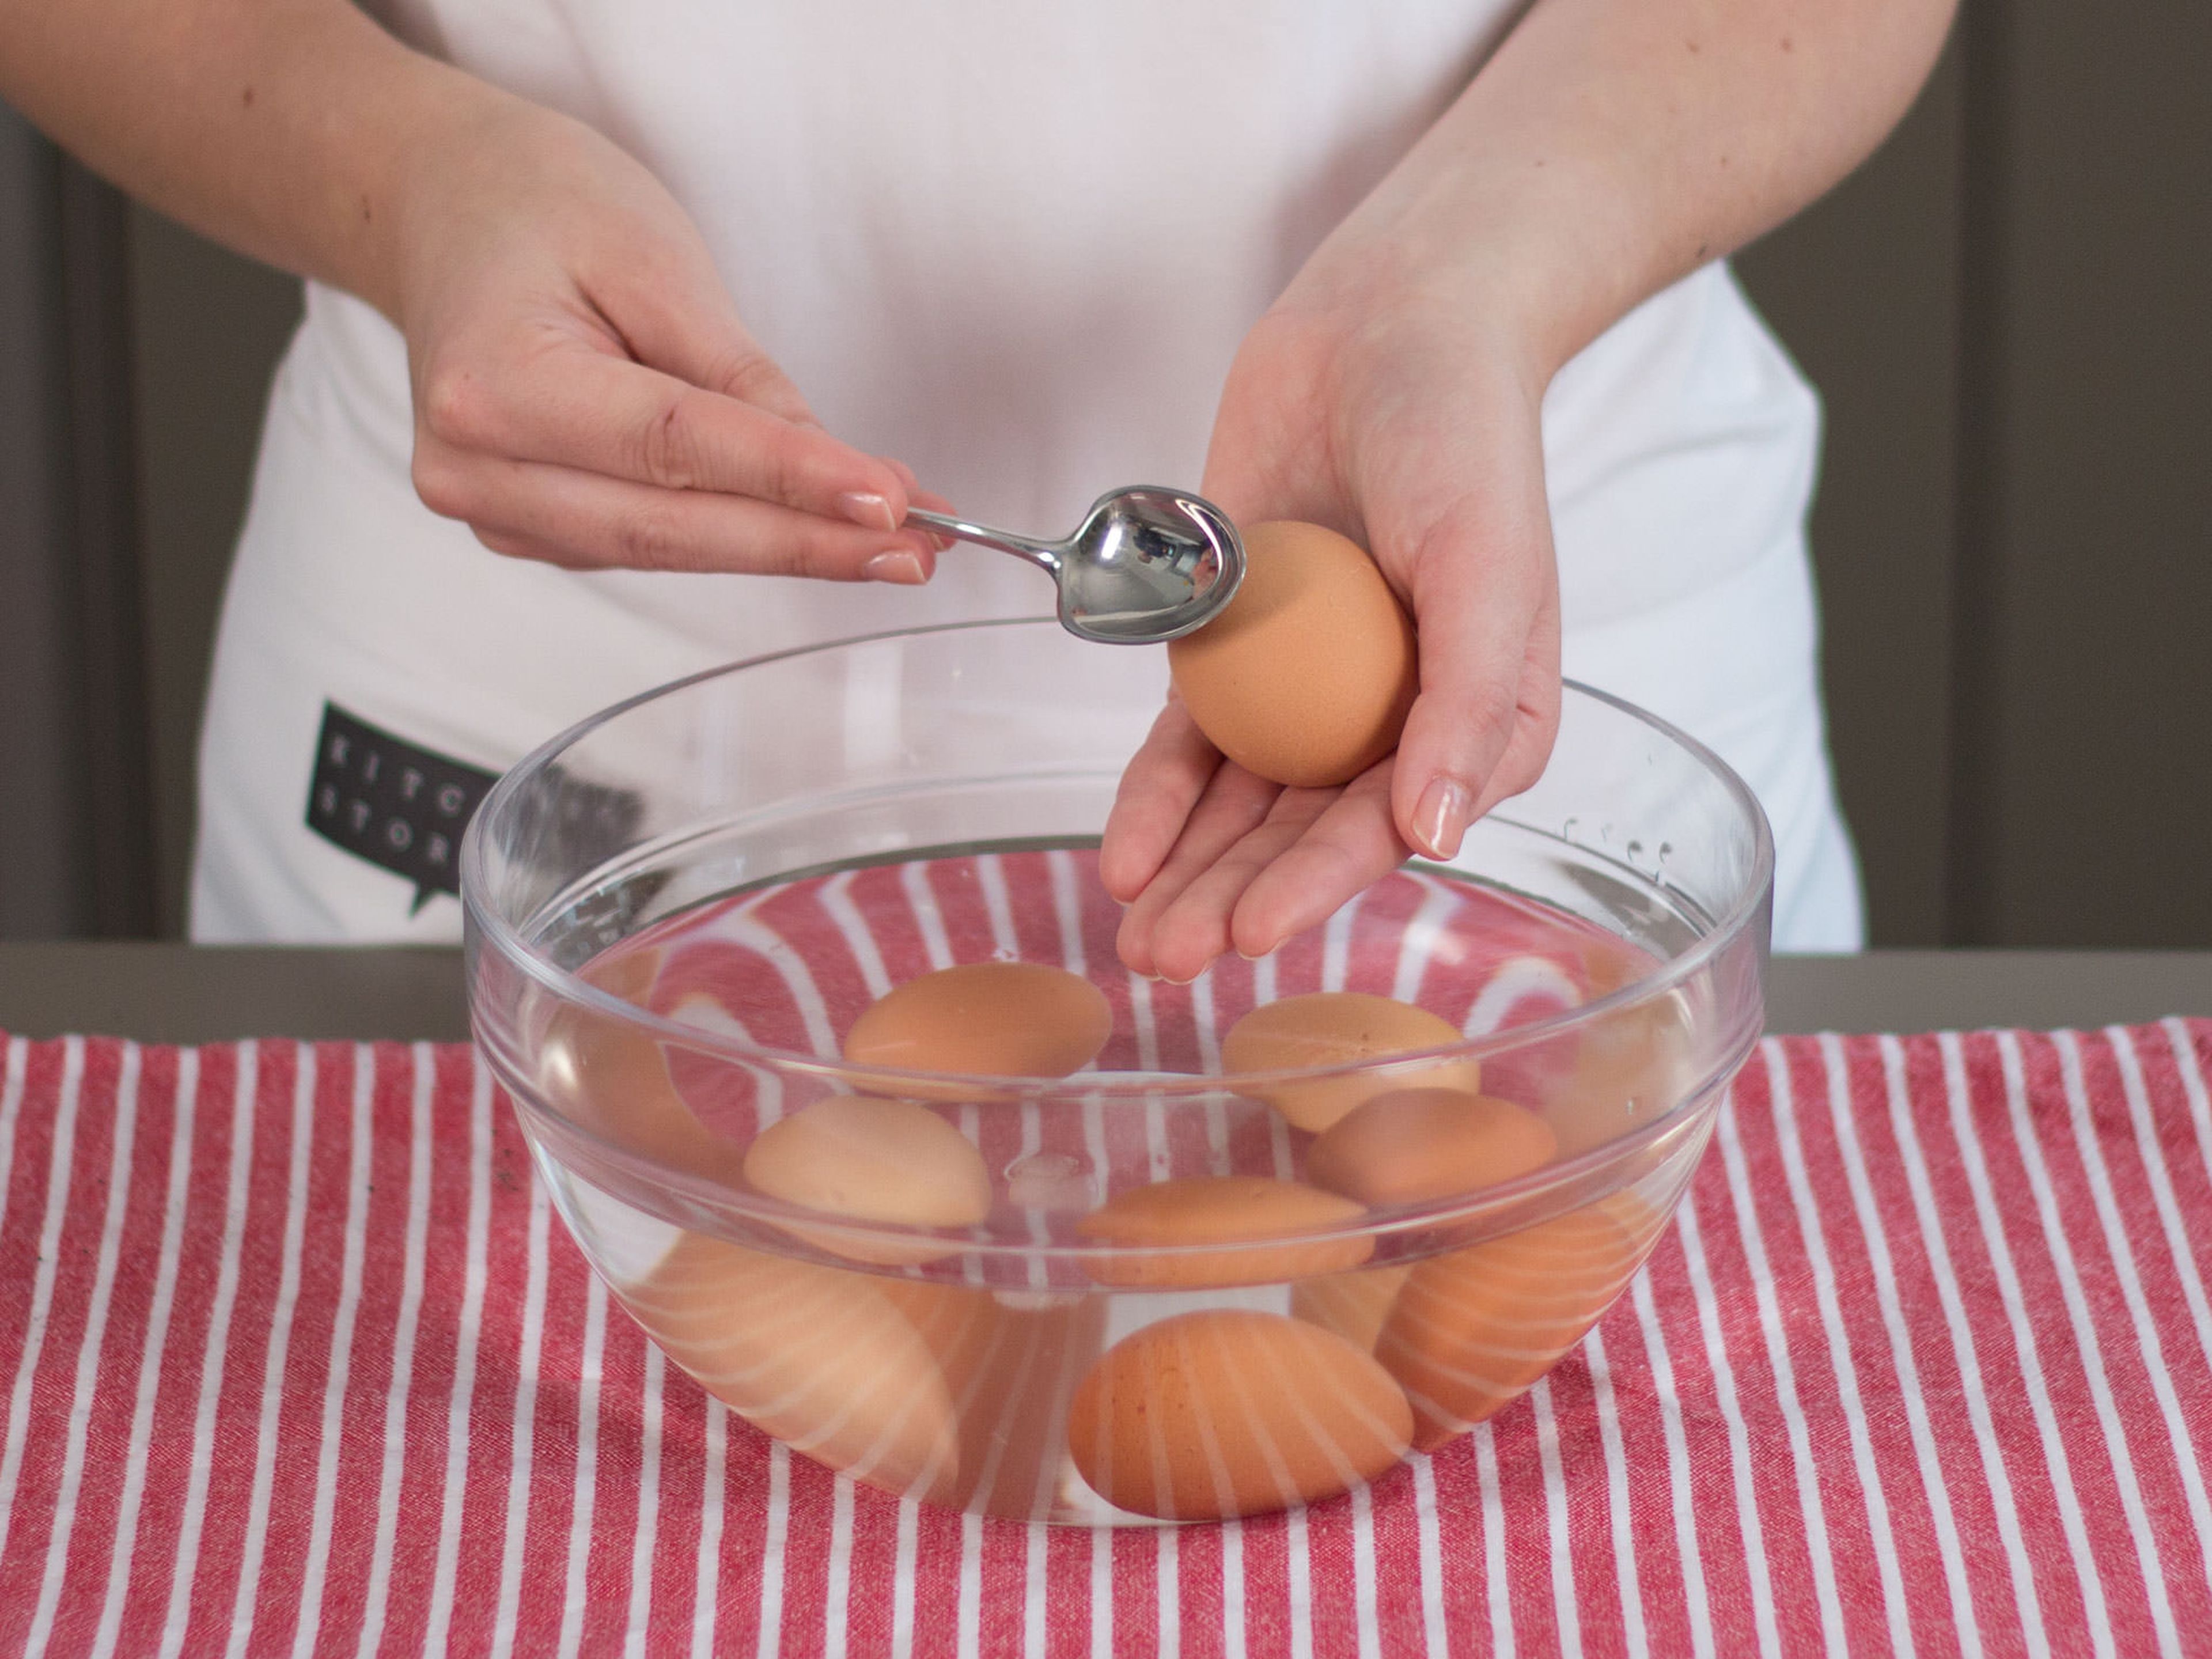 Once eggs have cooled, gently crack eggshells with the back of a spoon and set aside.